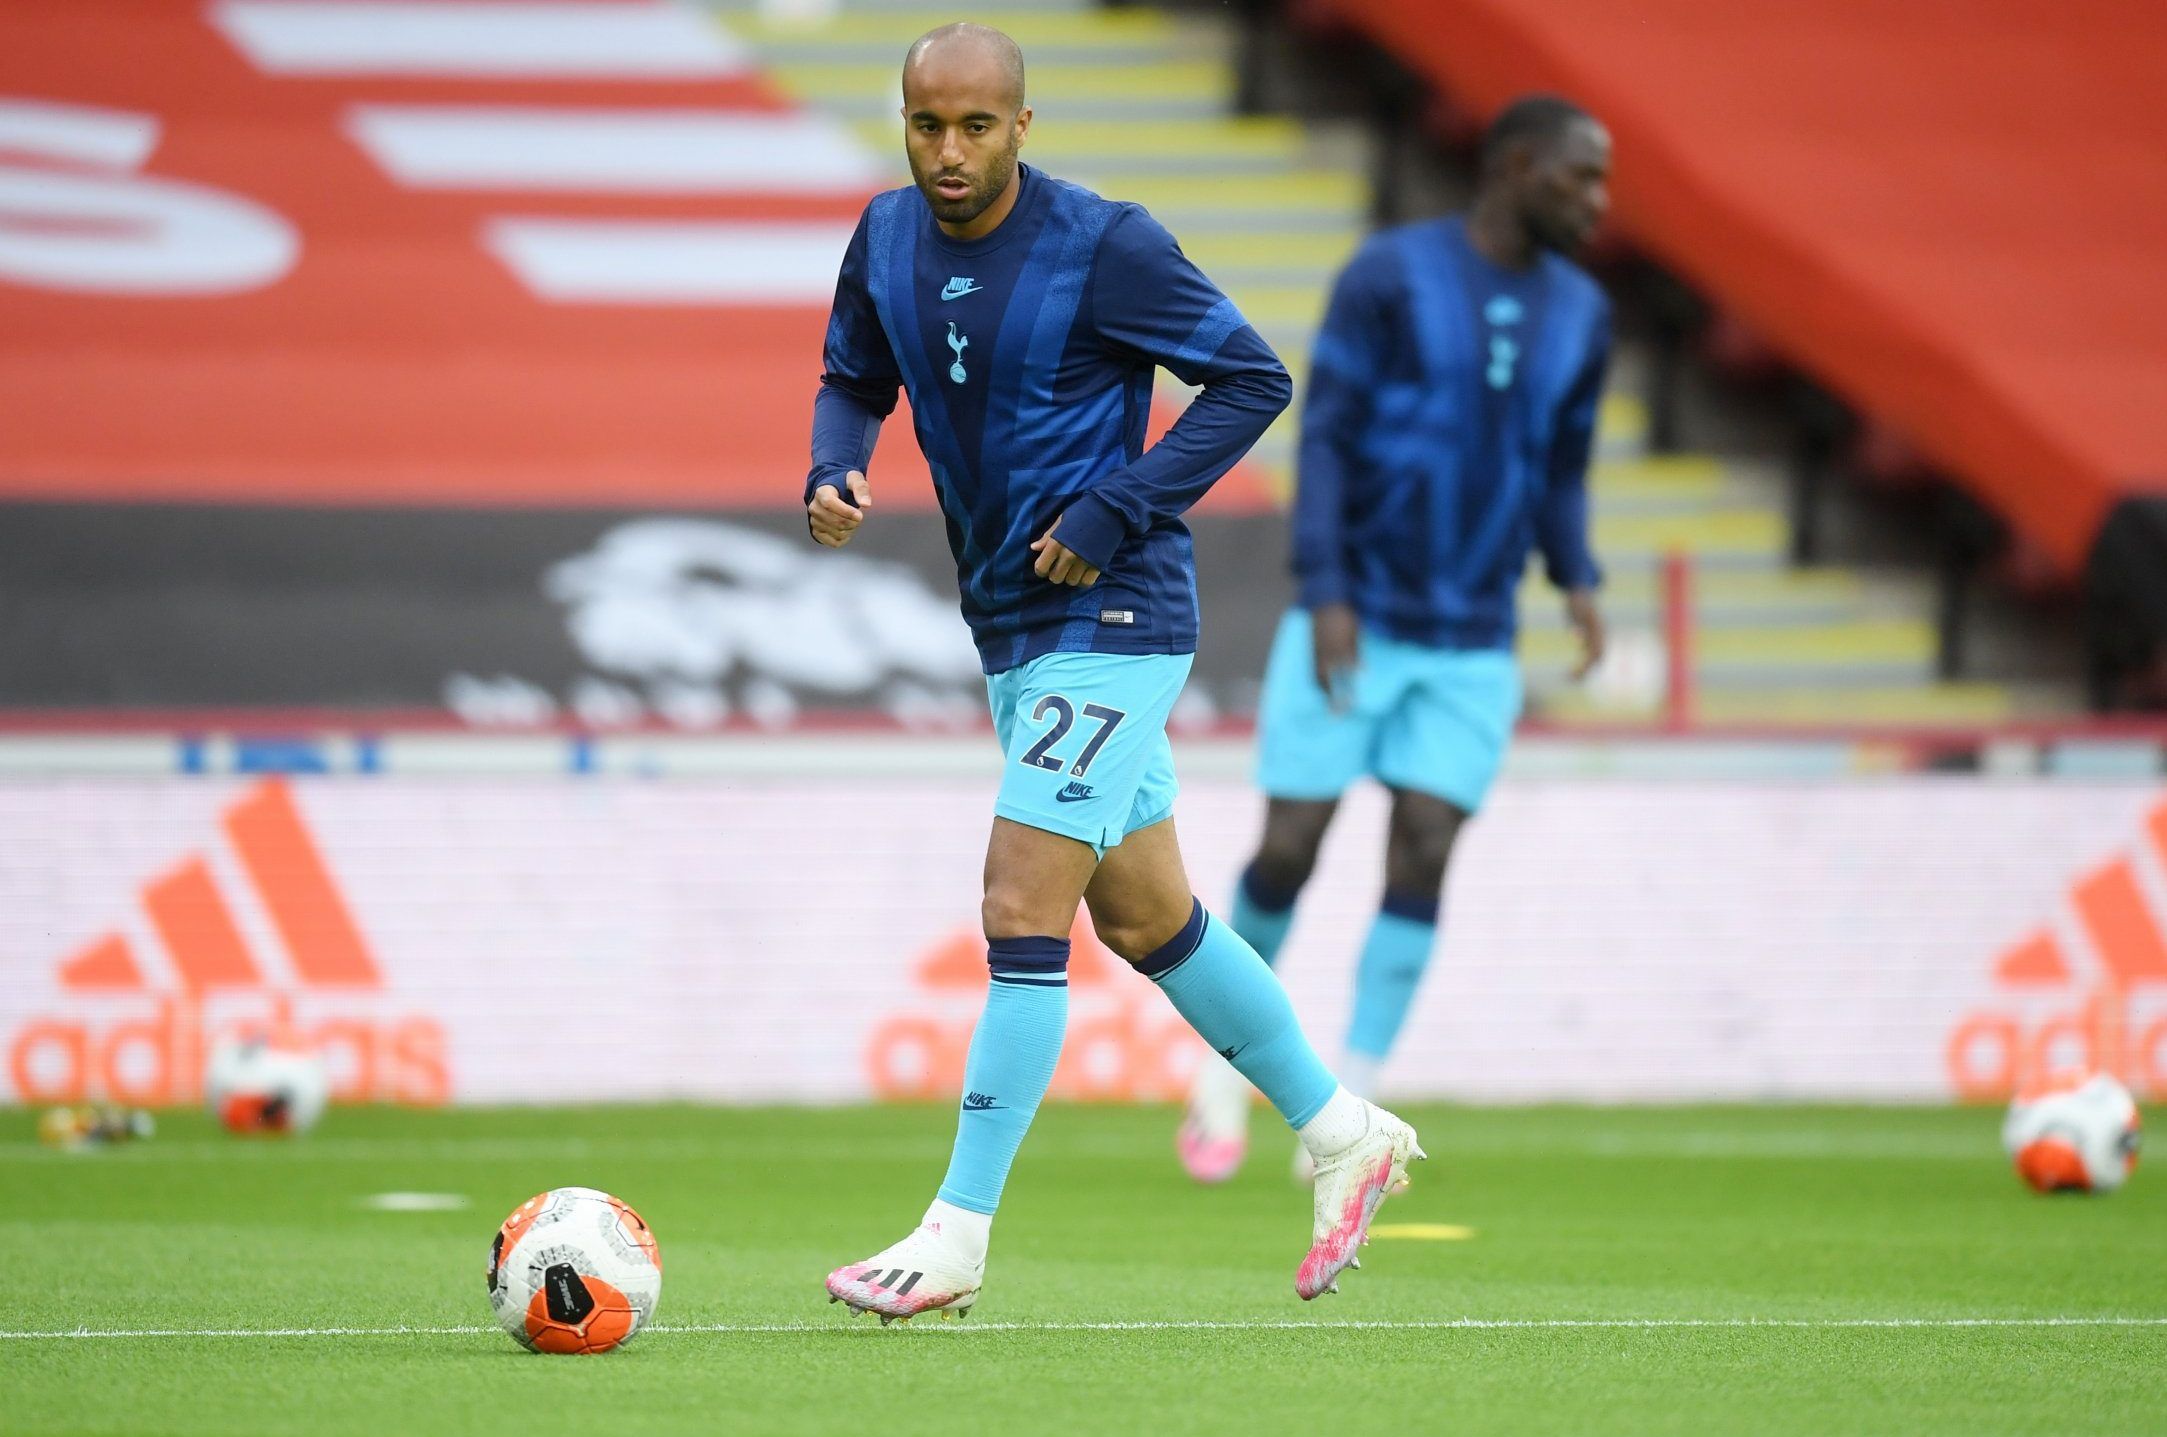 Spurs winger Lucas Moura warms up pre-game vs Sheffield United